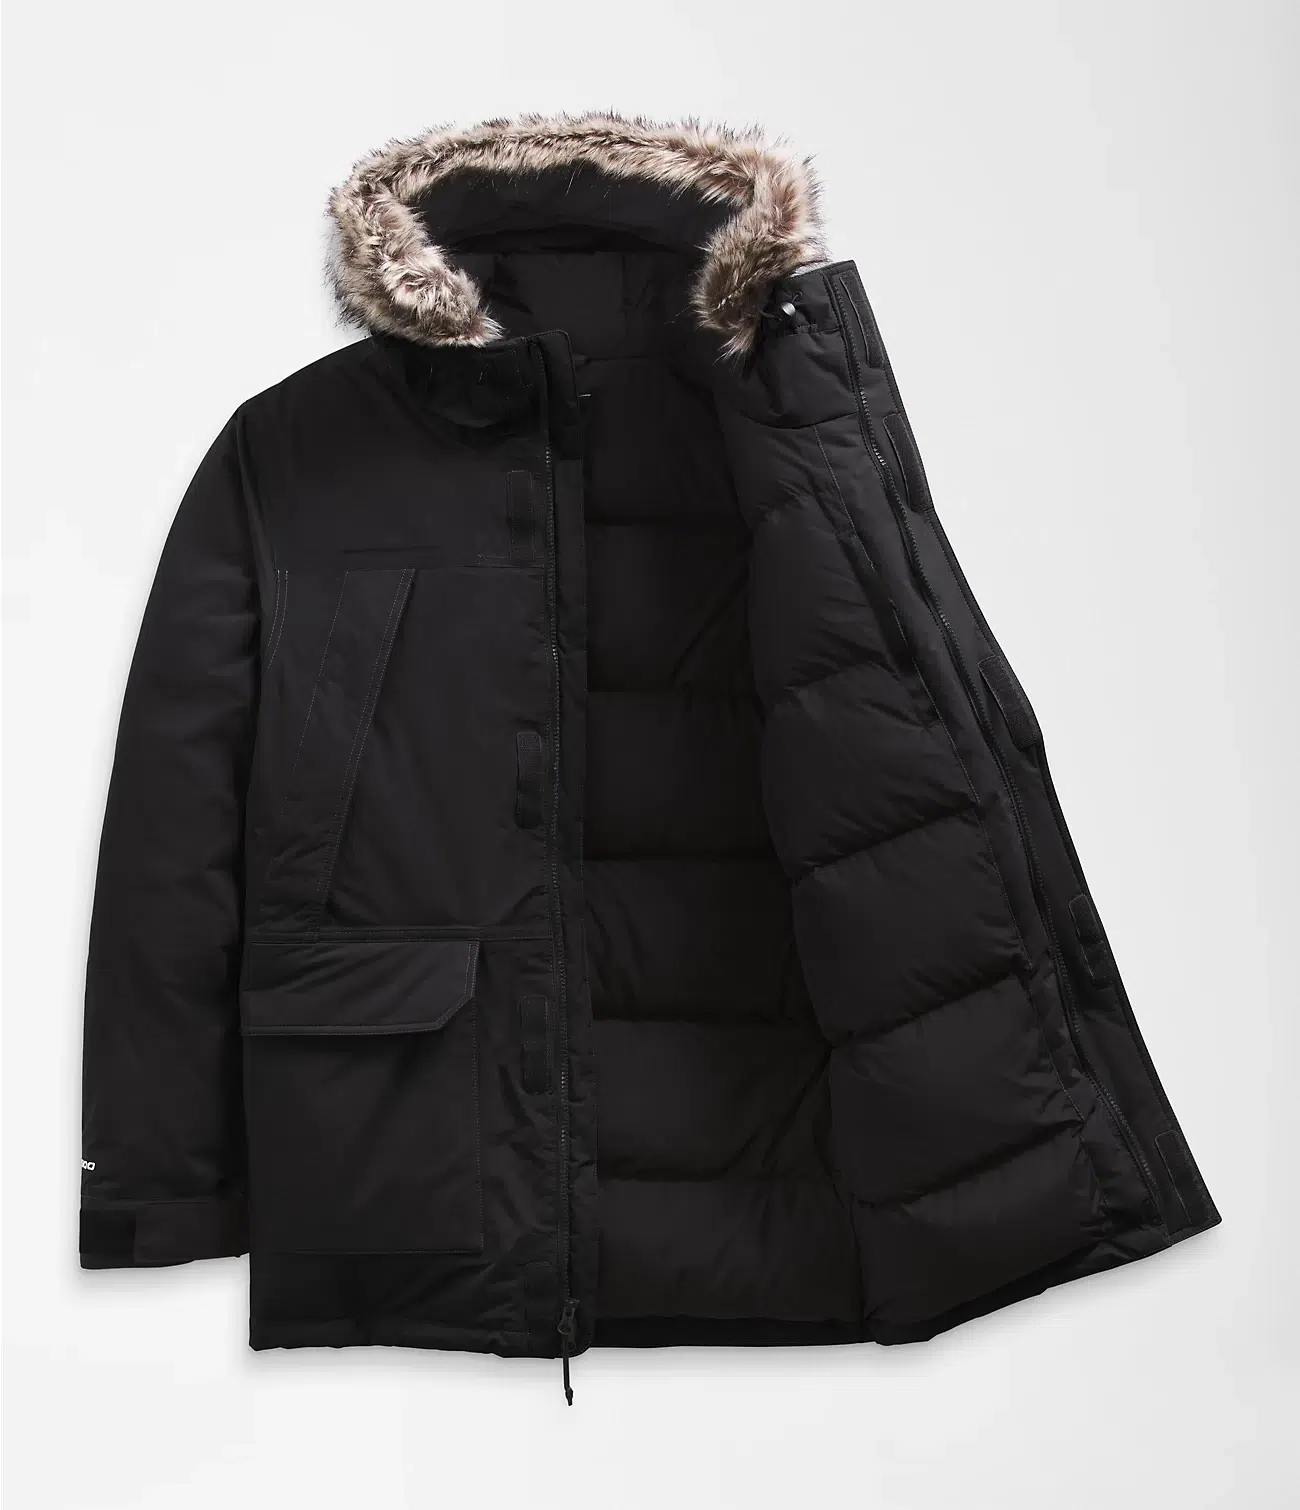 a great winter jacket for men